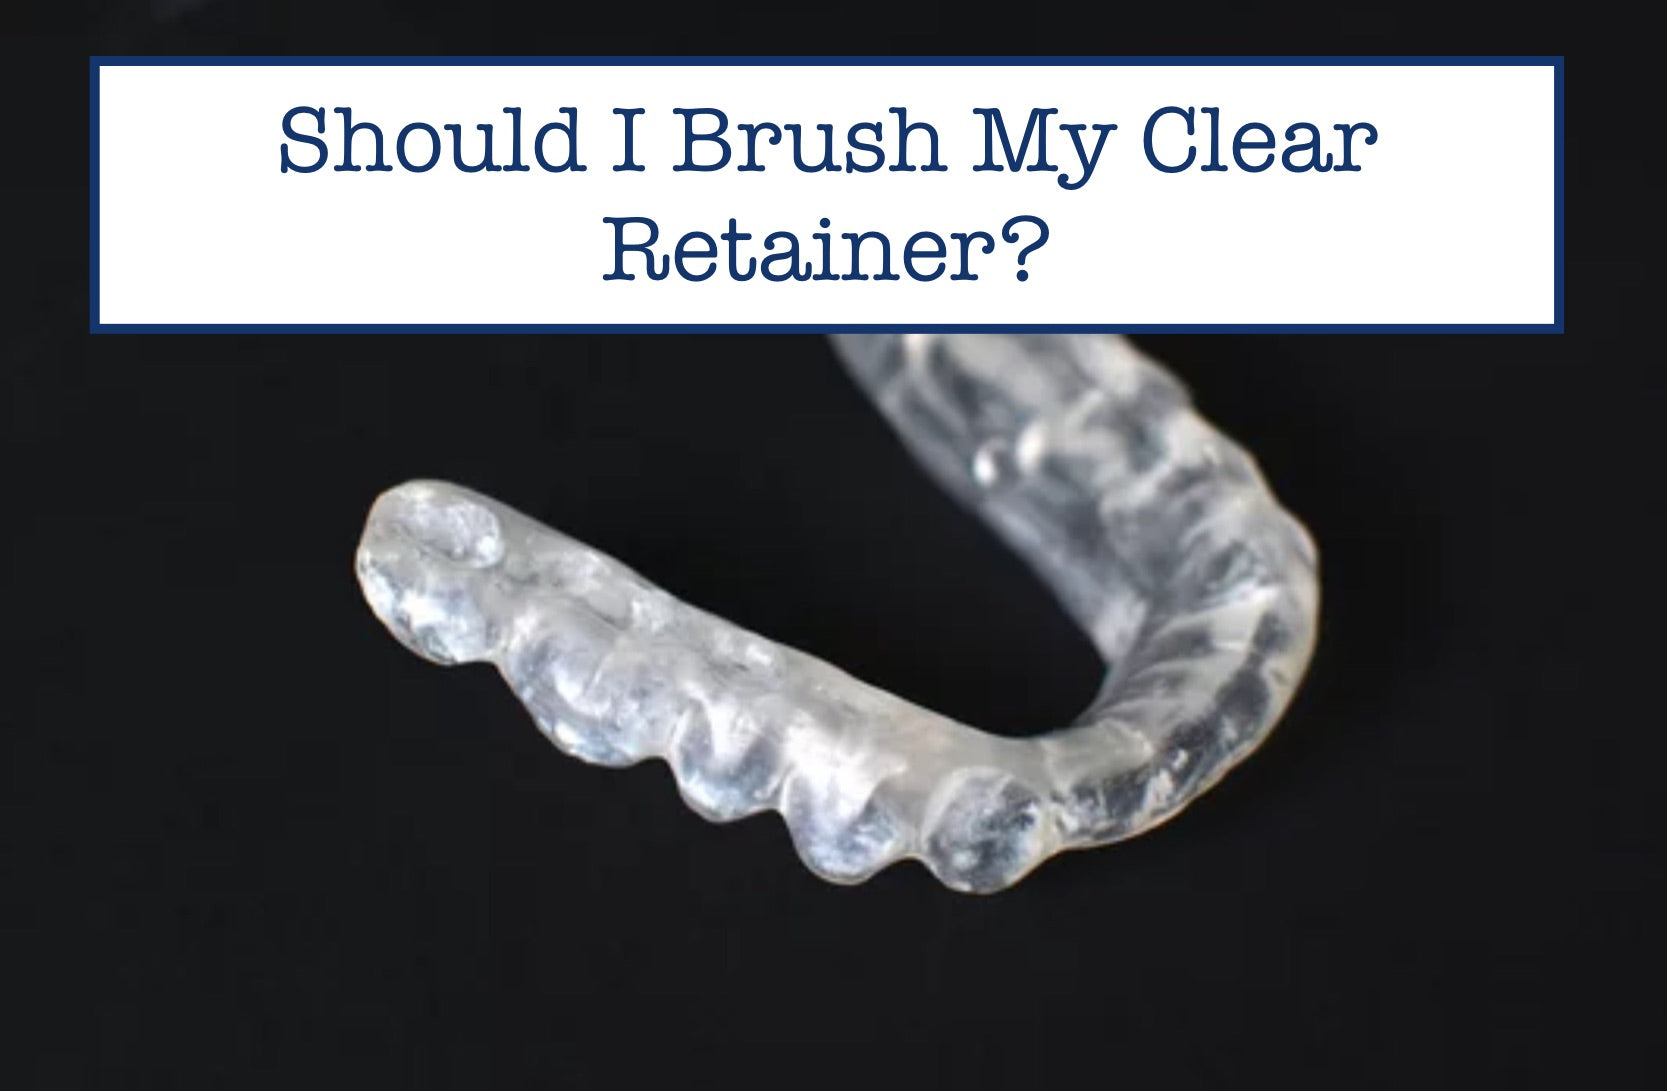 Should I Brush My Clear Retainer?